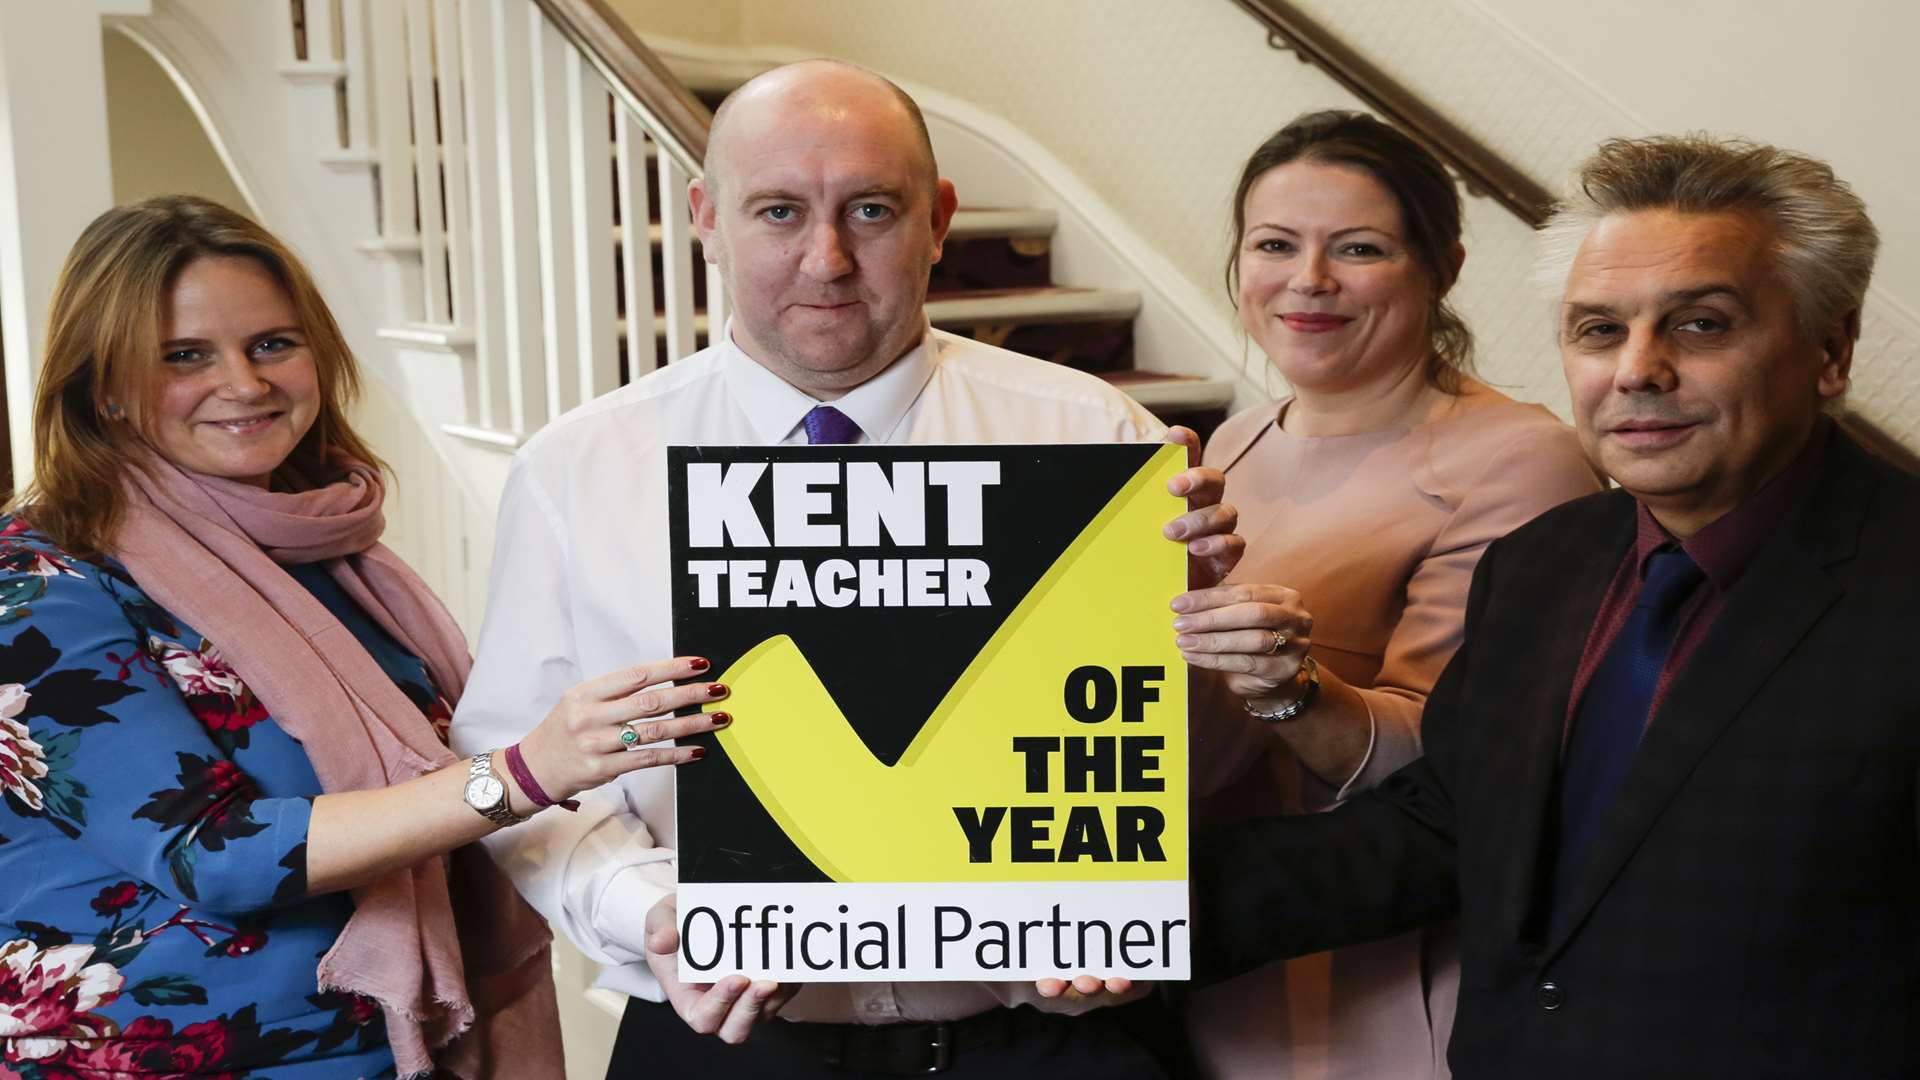 Sarah Bottle of Kent Libraries, Tim Sells of Kent Sports, Jill Allen of Project Salus, Anton Francic of Kent County Council, call for final nominations.